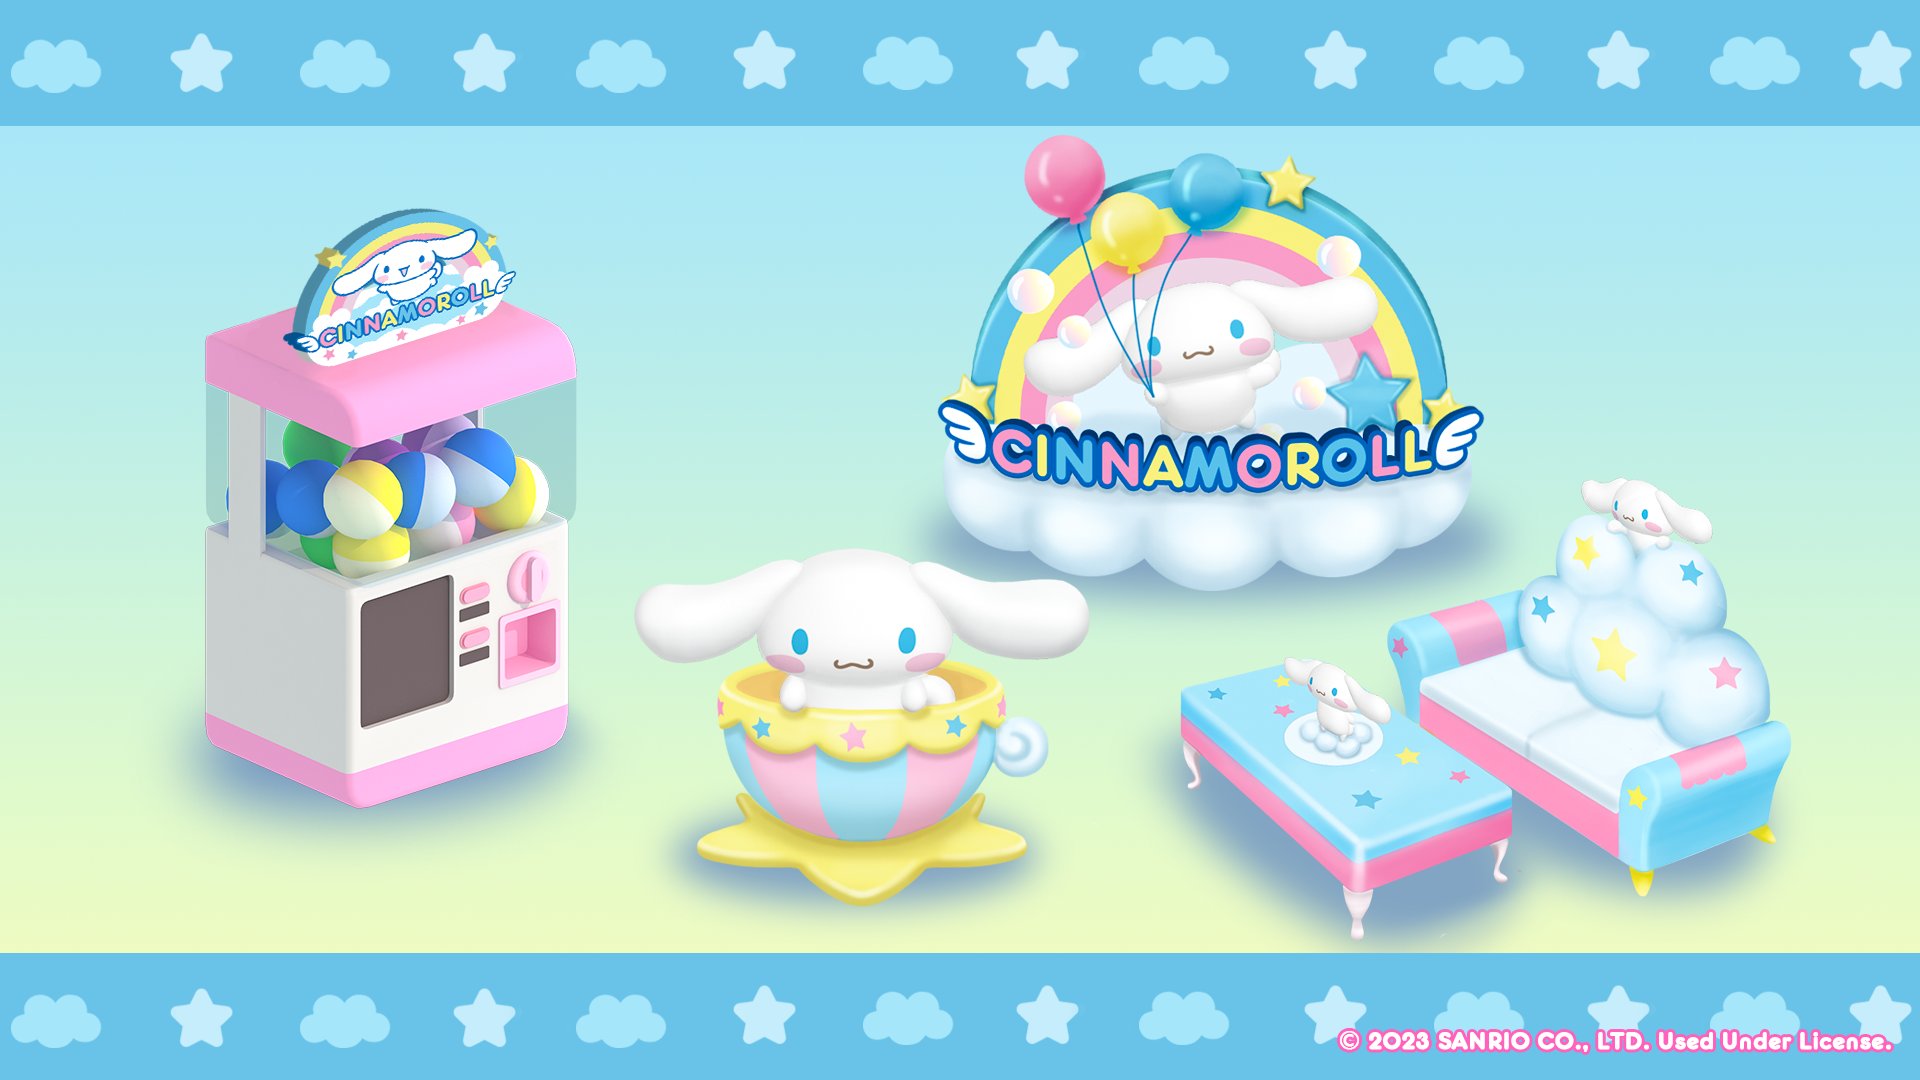 Rock Panda Games on X: Cinnamoroll's Cloud Cafe is officially open!🥳 😊  Join the Cinnamoroll's Cloud Cafe mini game to play as chef and waiters,  making delicious coffee and desserts for all